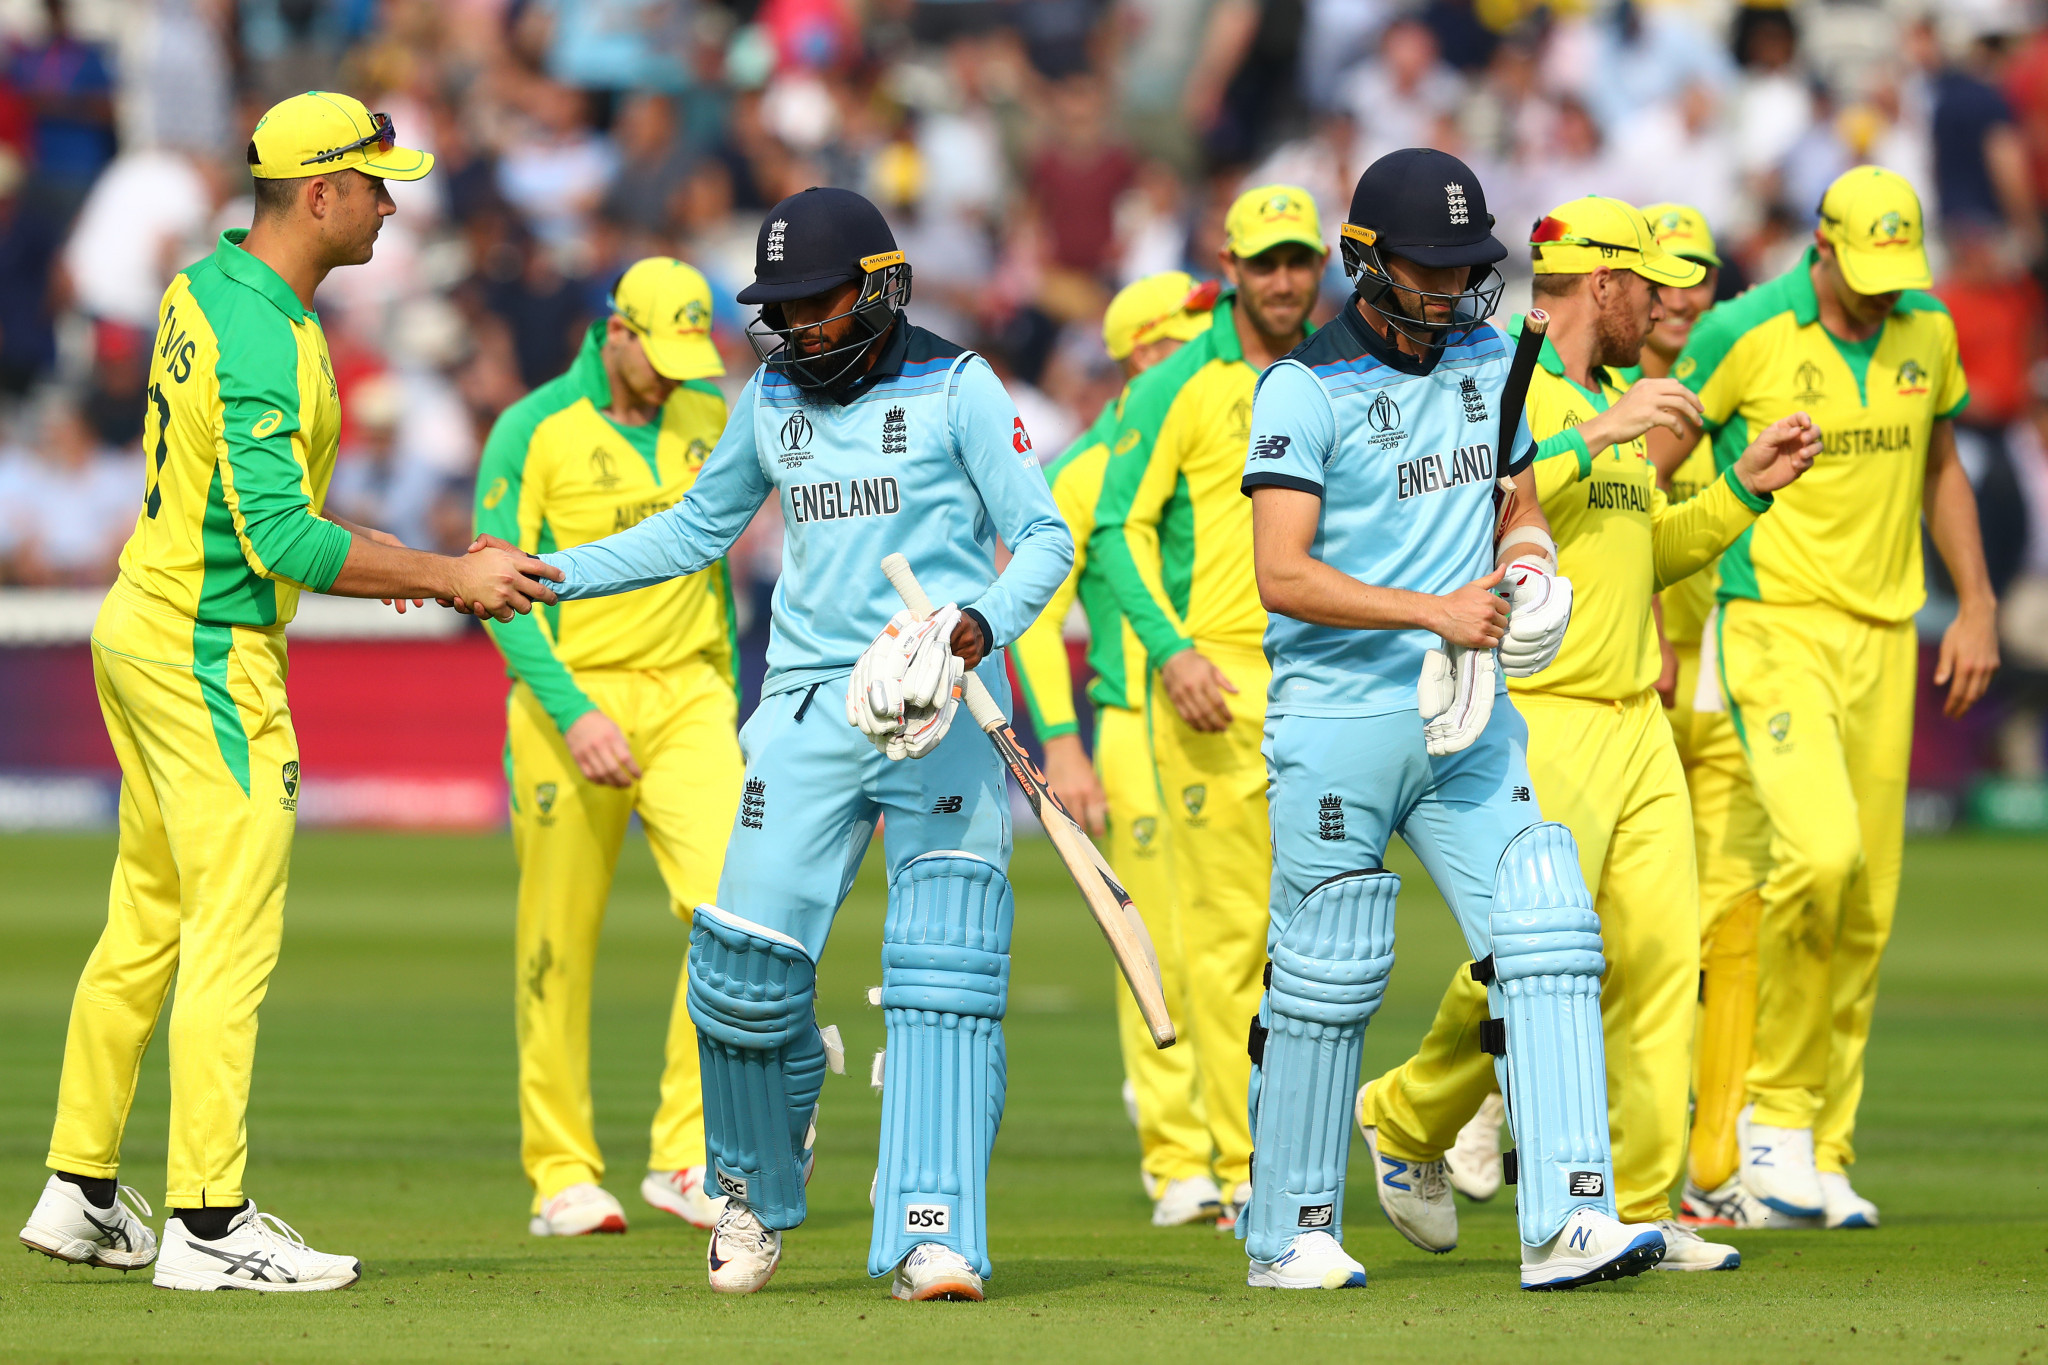 Hosts England suffer damaging defeat against Australia at Cricket World Cup